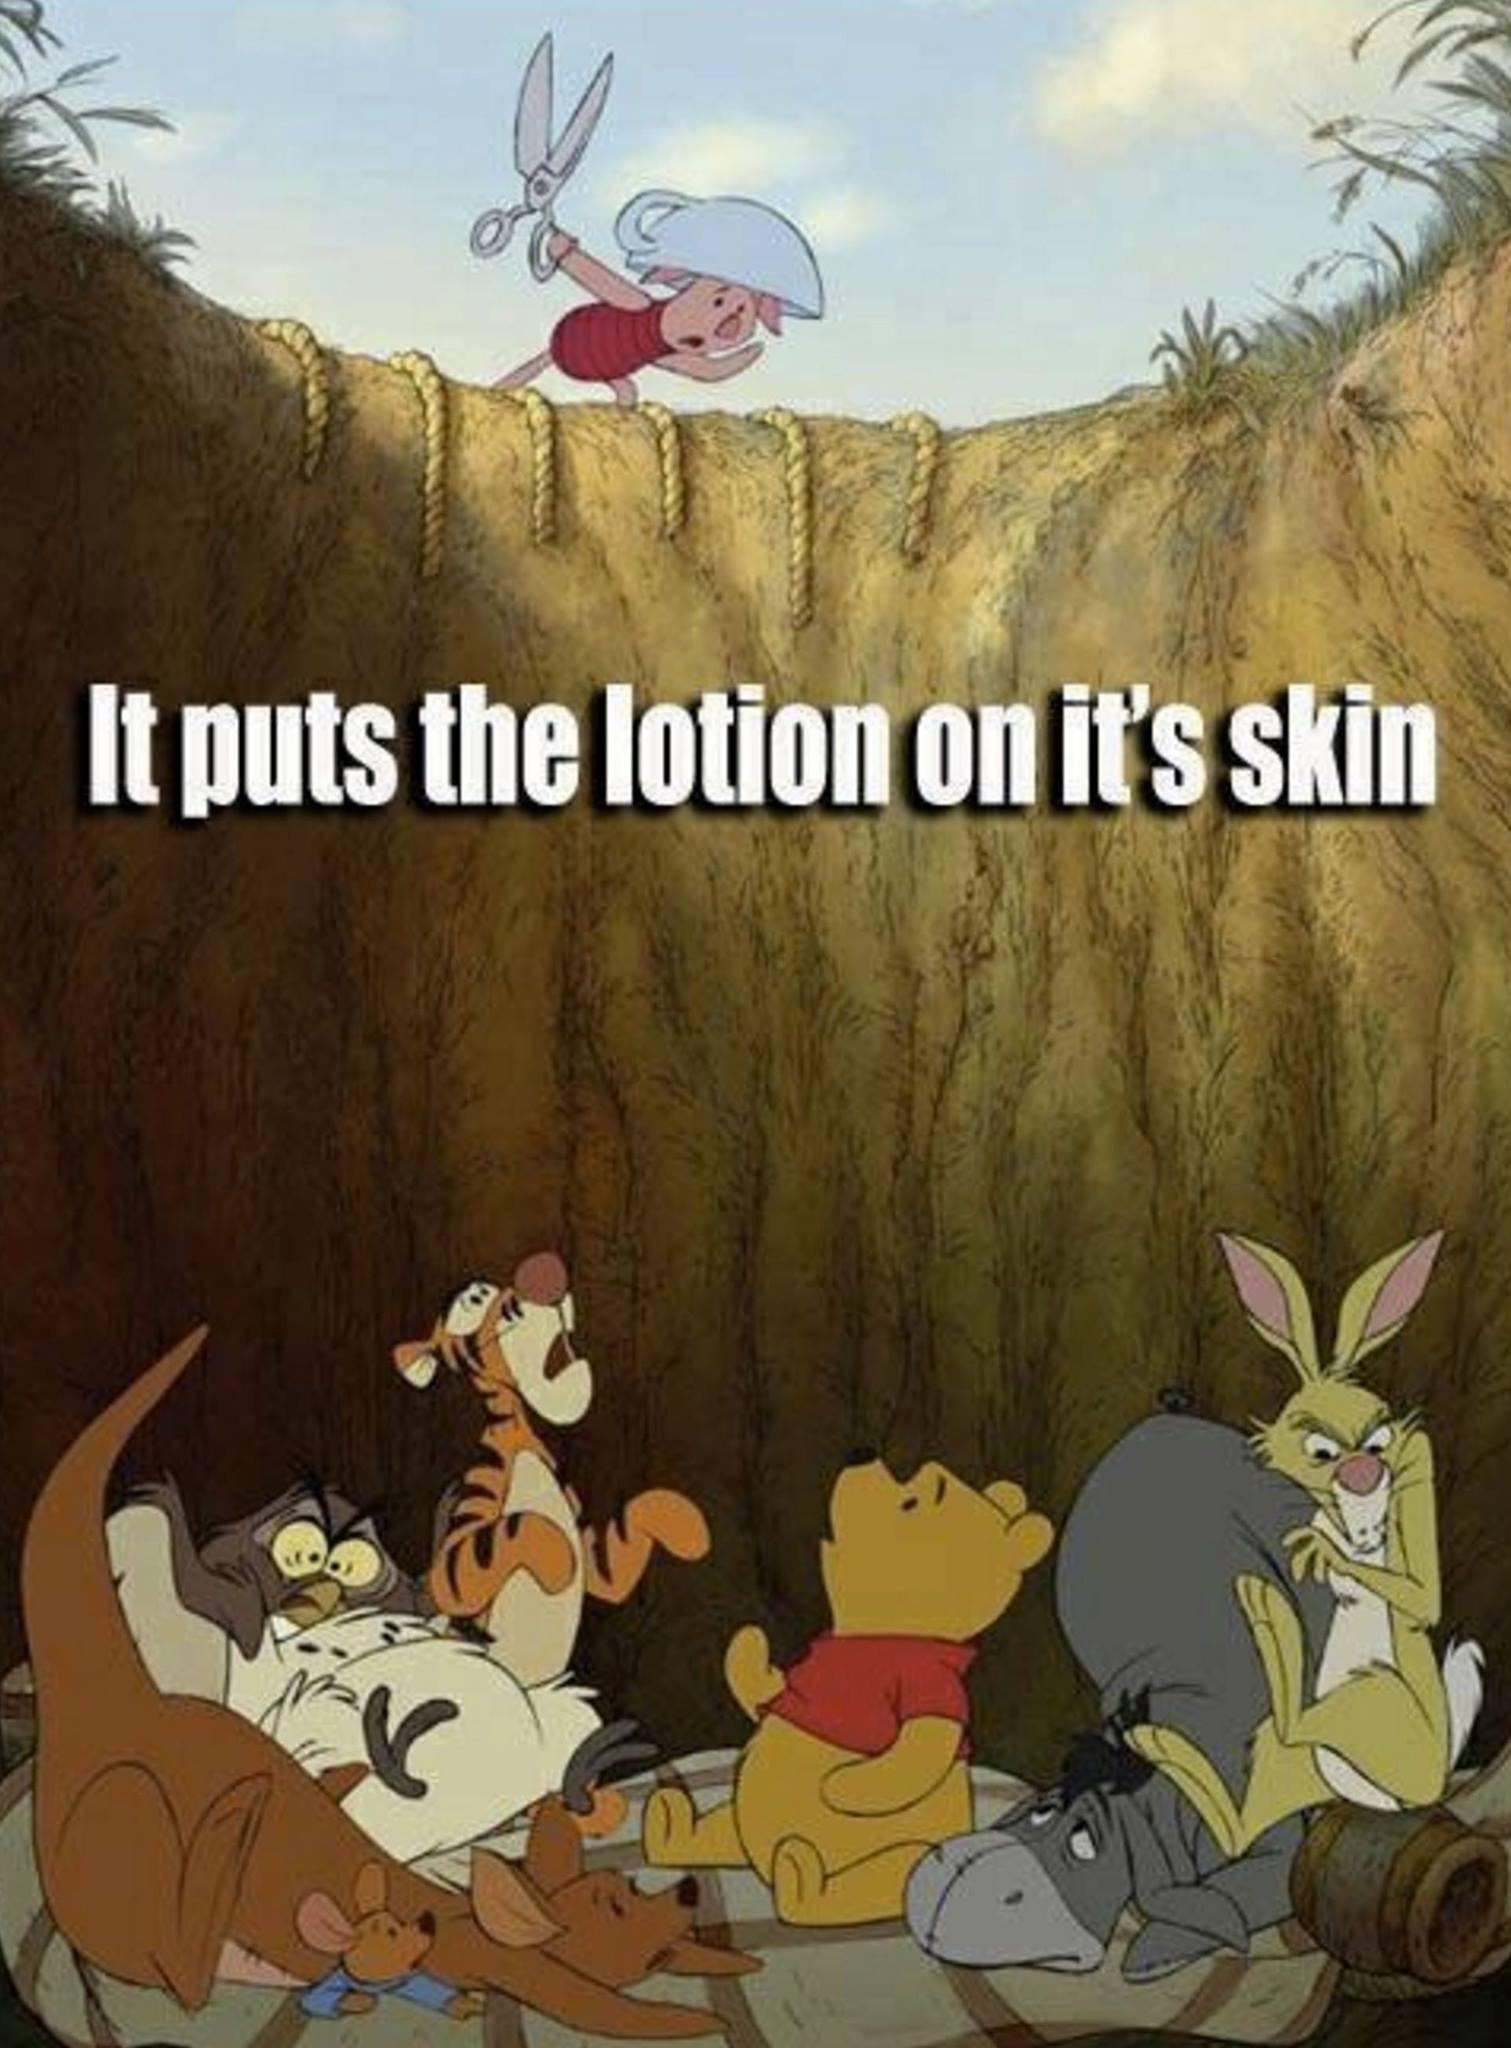 winnie the pooh movie 2011 - It puts the lotion on it's skin